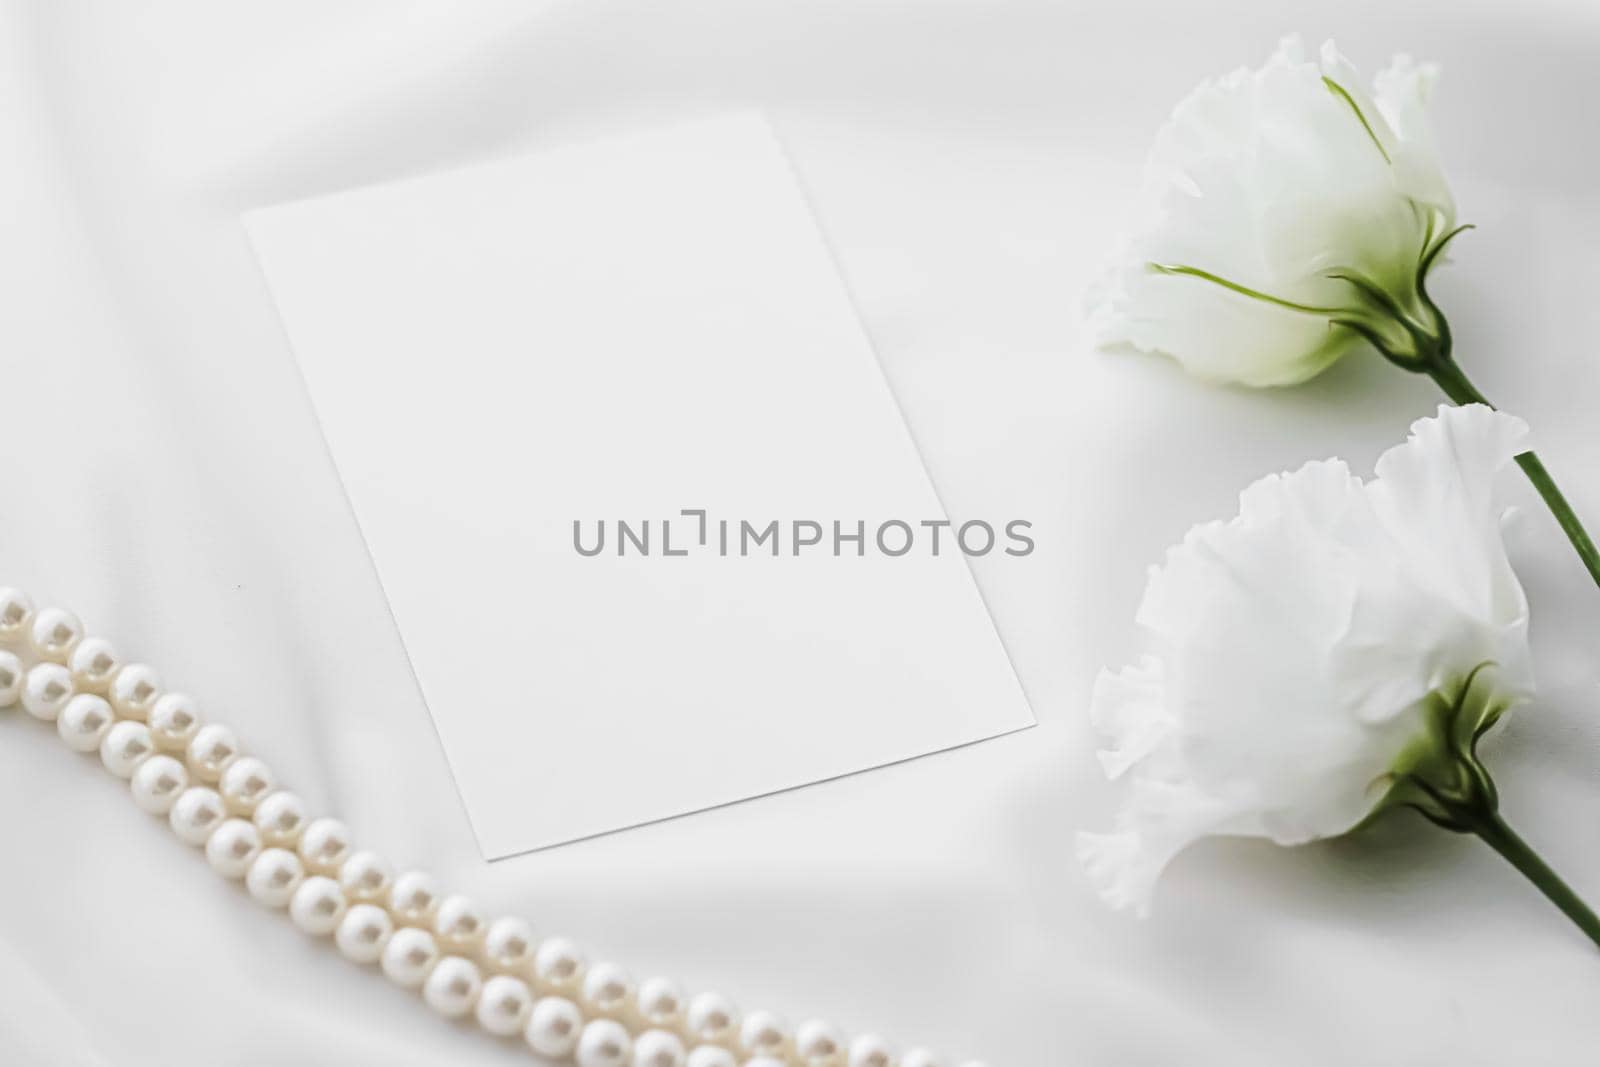 Wedding invitation, white rose flowers and pearls on silk fabric as bridal flatlay background, blank paper greeting card and holiday branding, flat lay design concept